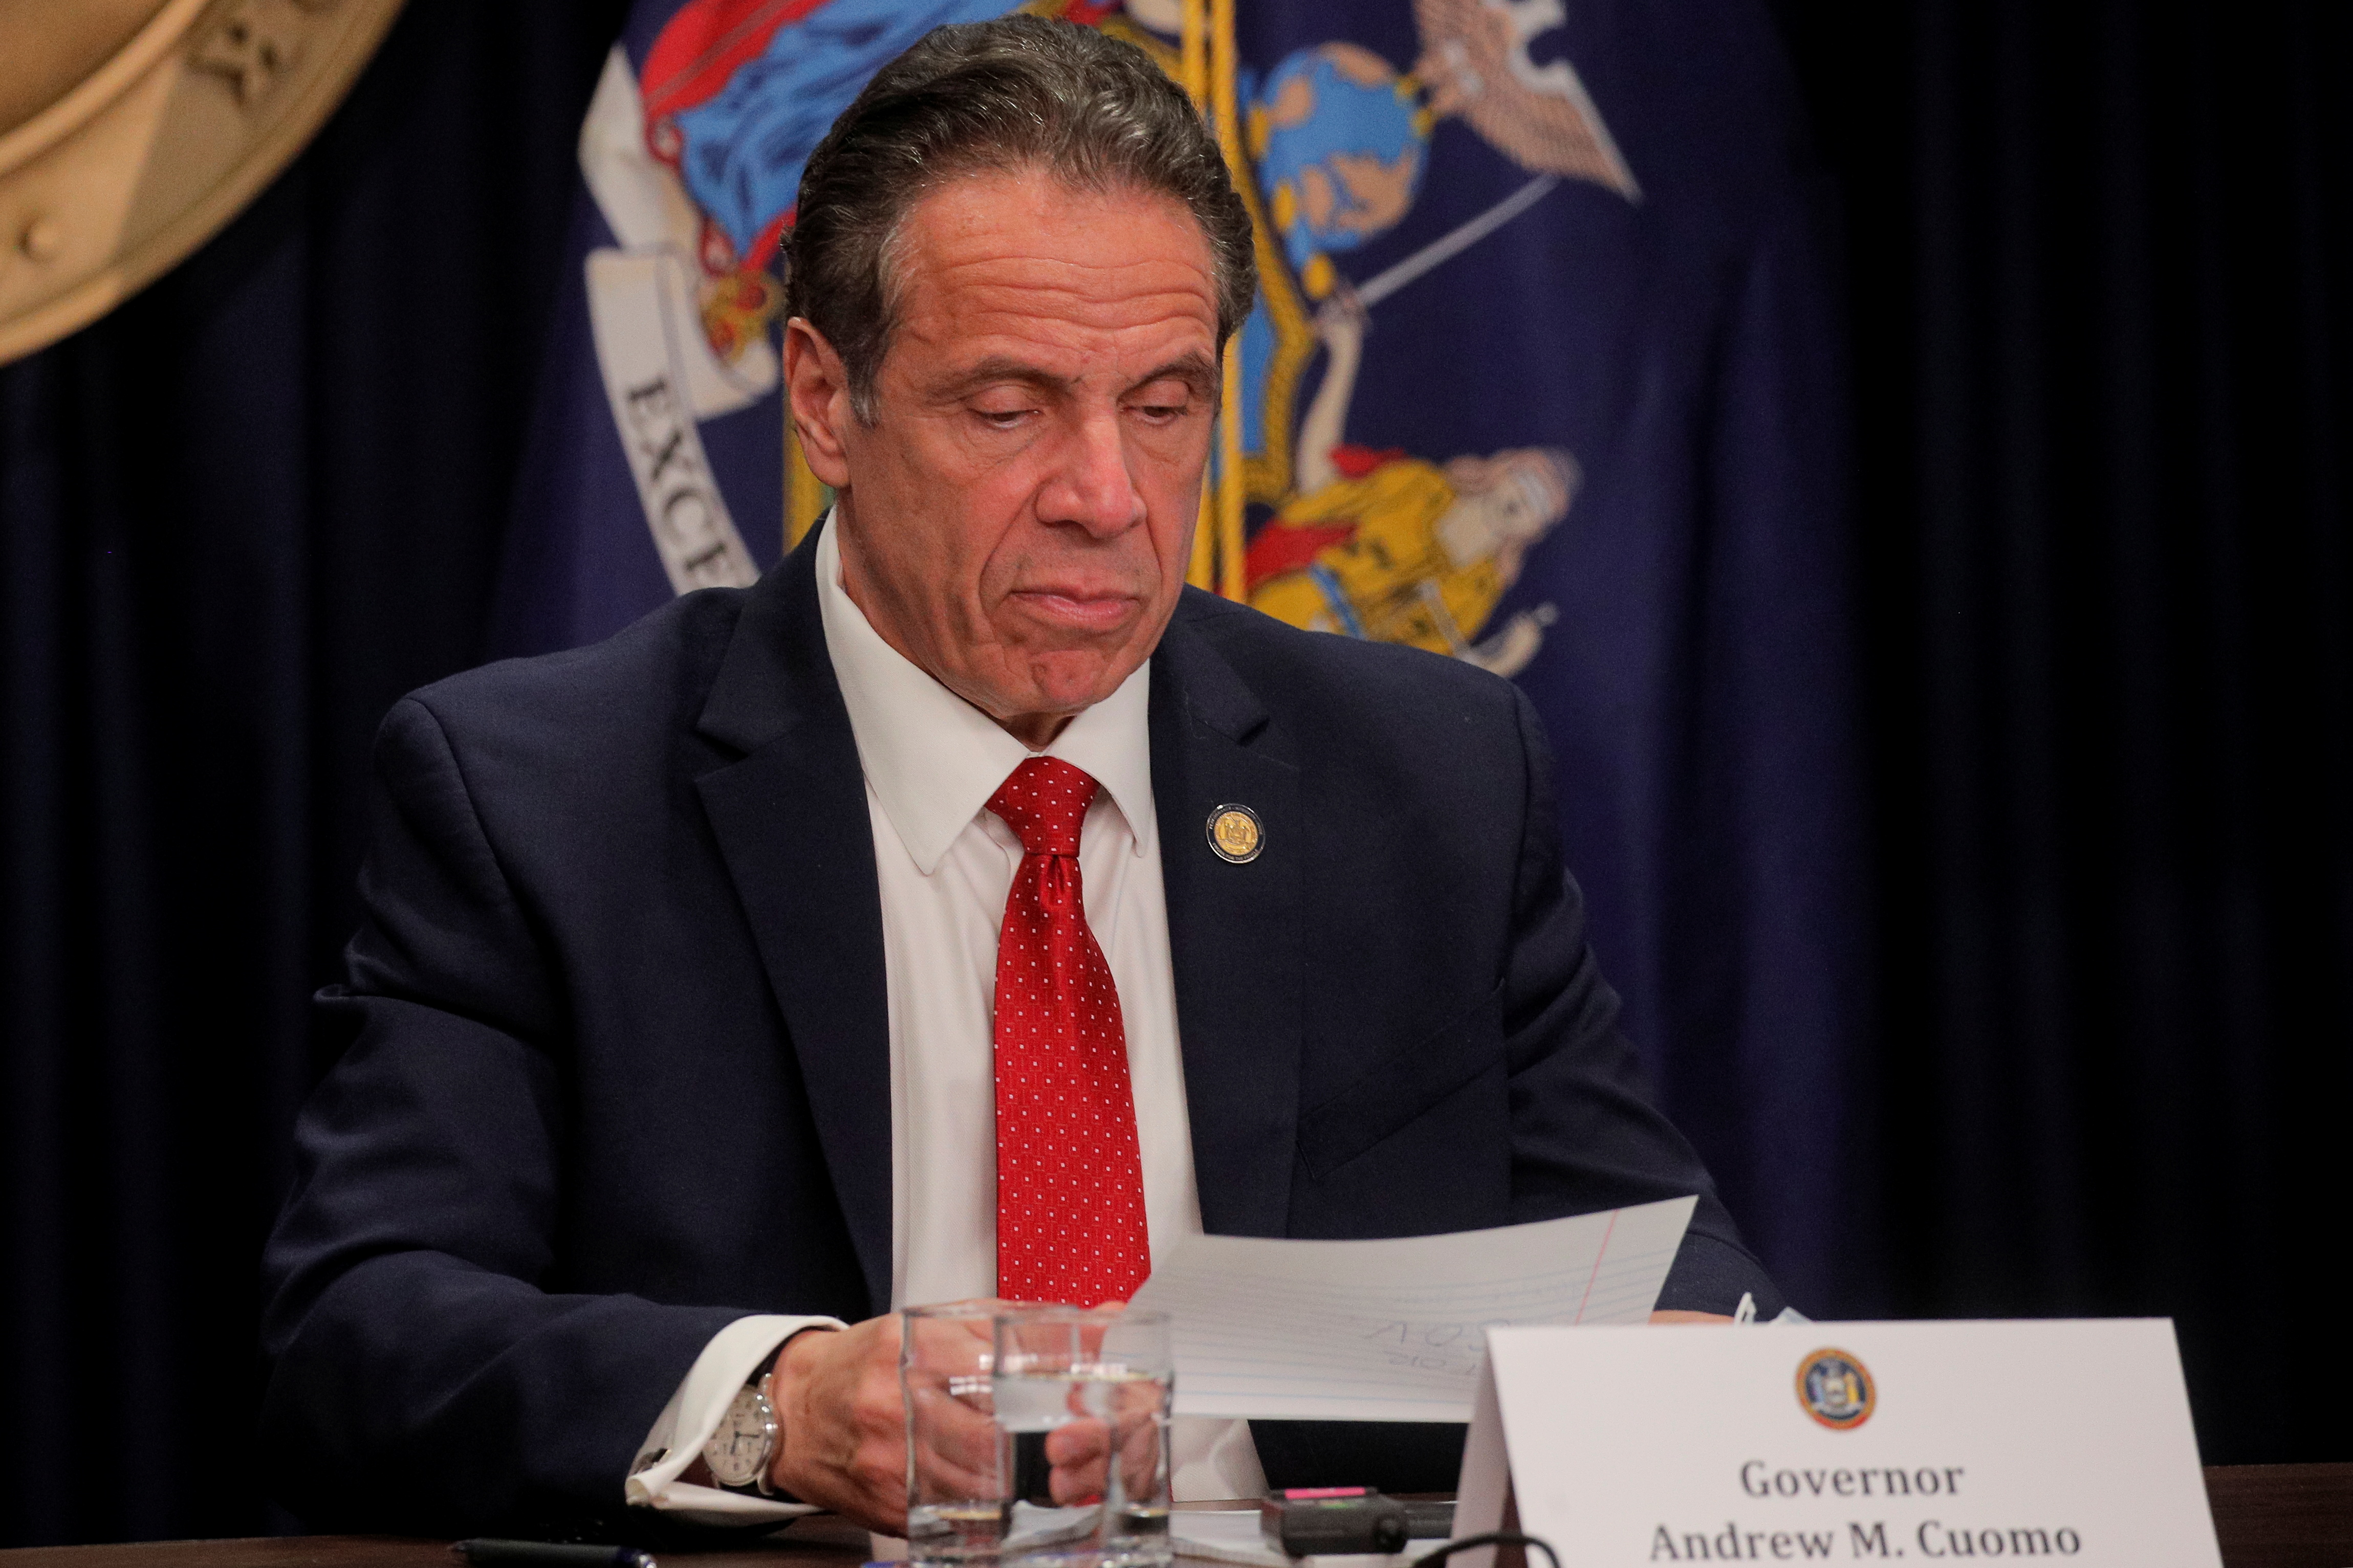 New York Governor Andrew Cuomo reads a note during a news conference at his offices in New York